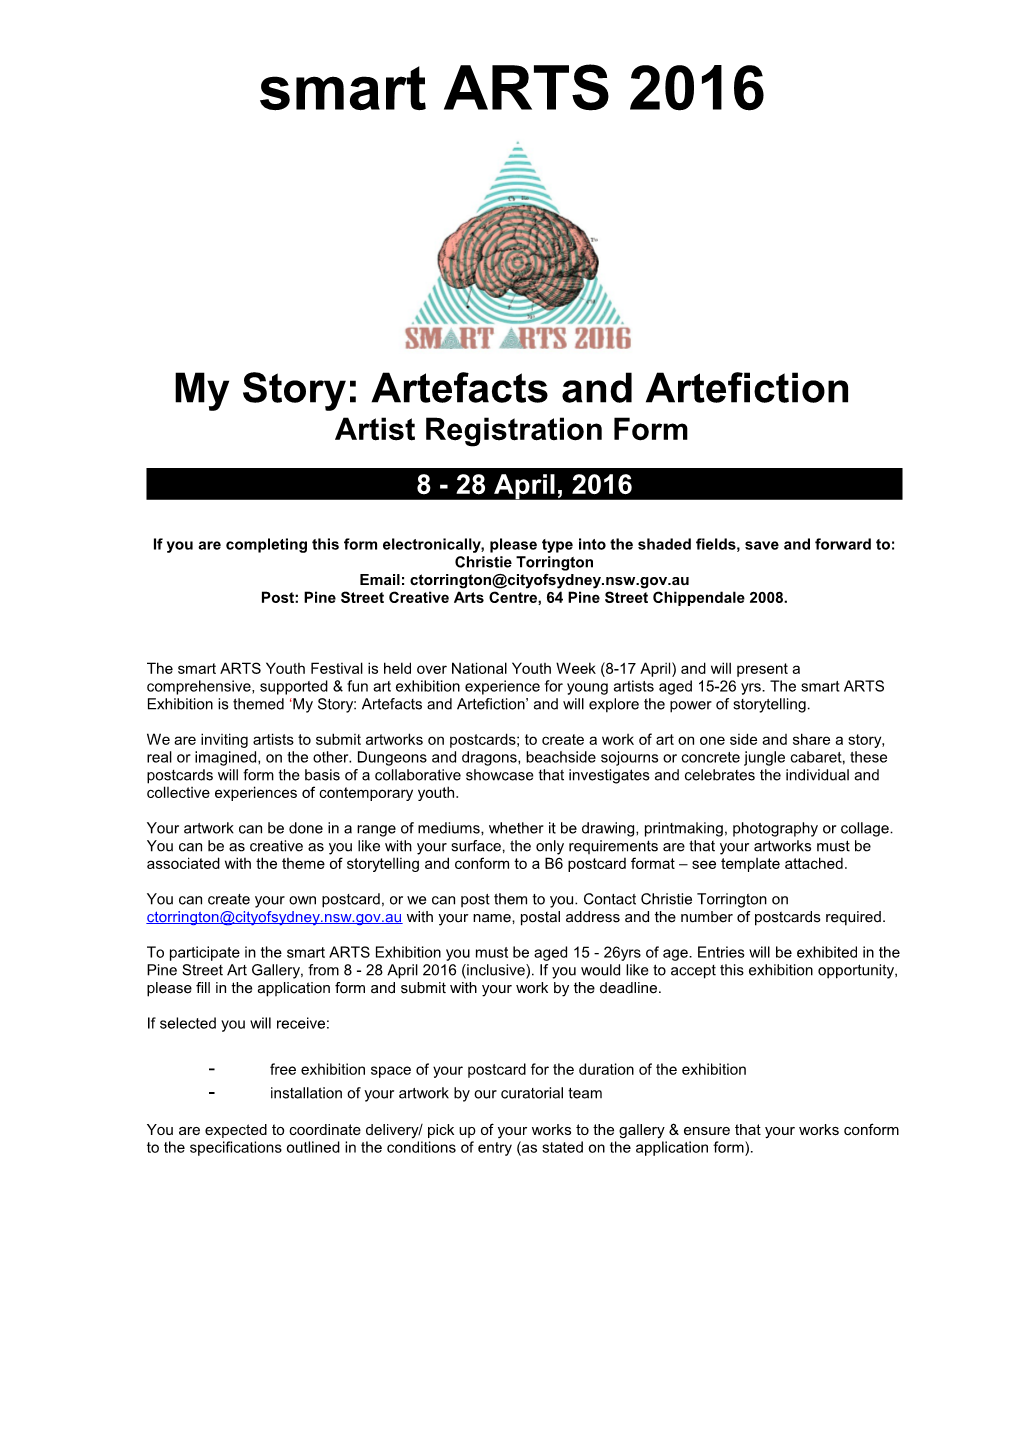 My Story: Artefacts and Artefiction